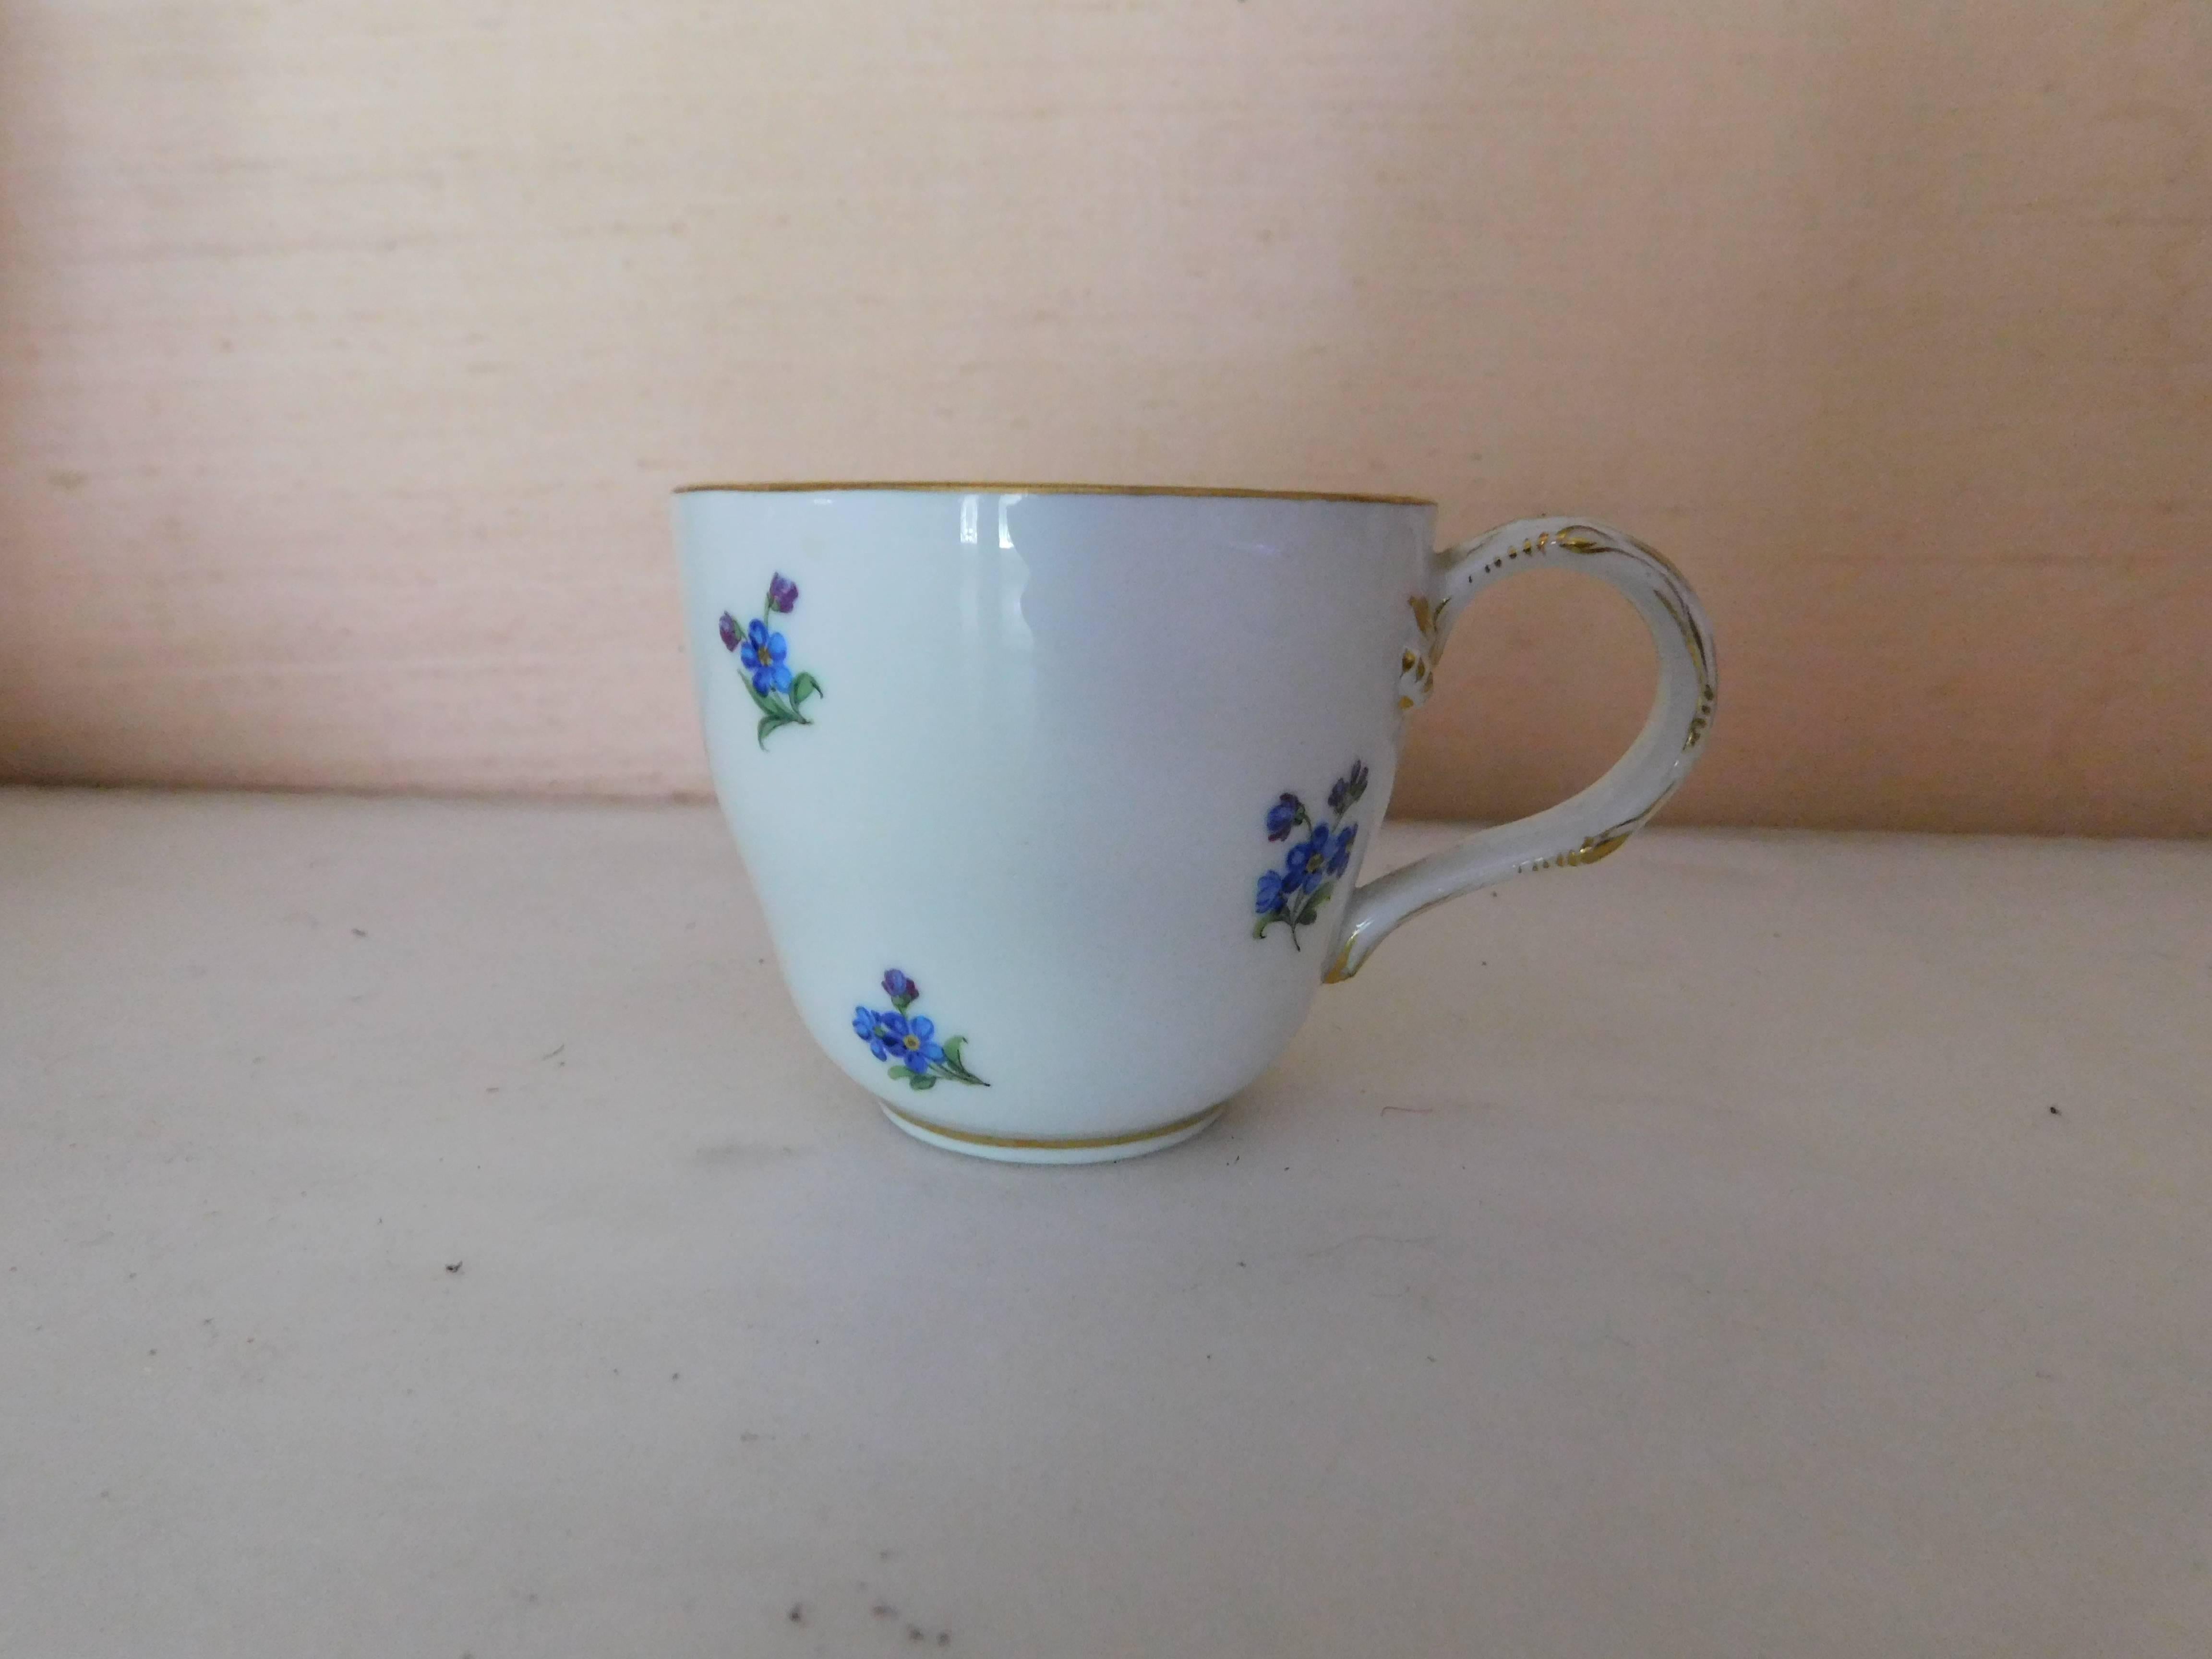 Early 19th century Meissen porcelain blue flower demitasse cup and saucer with
tree handle gold trim.